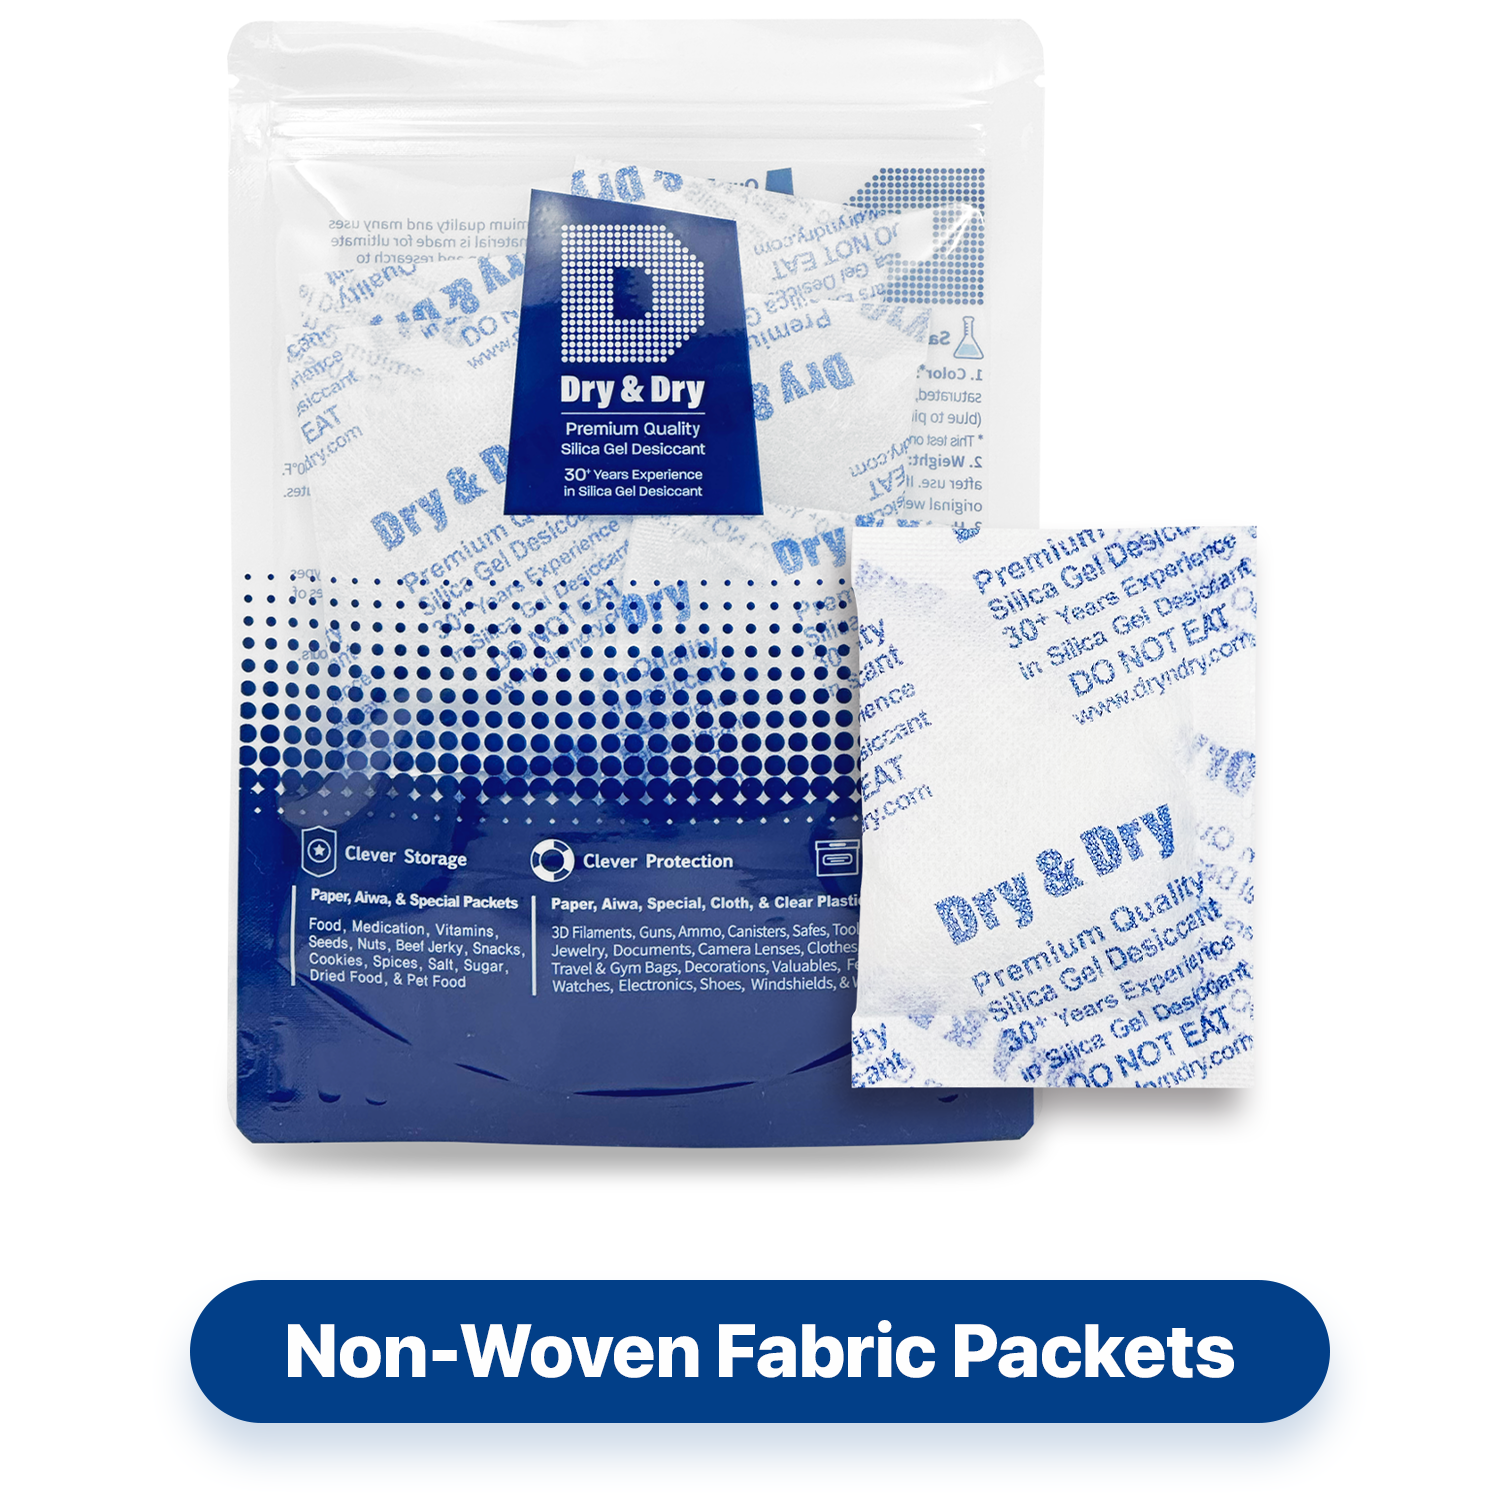 20 Gram Non-Woven Fabric(Cloth) Packets